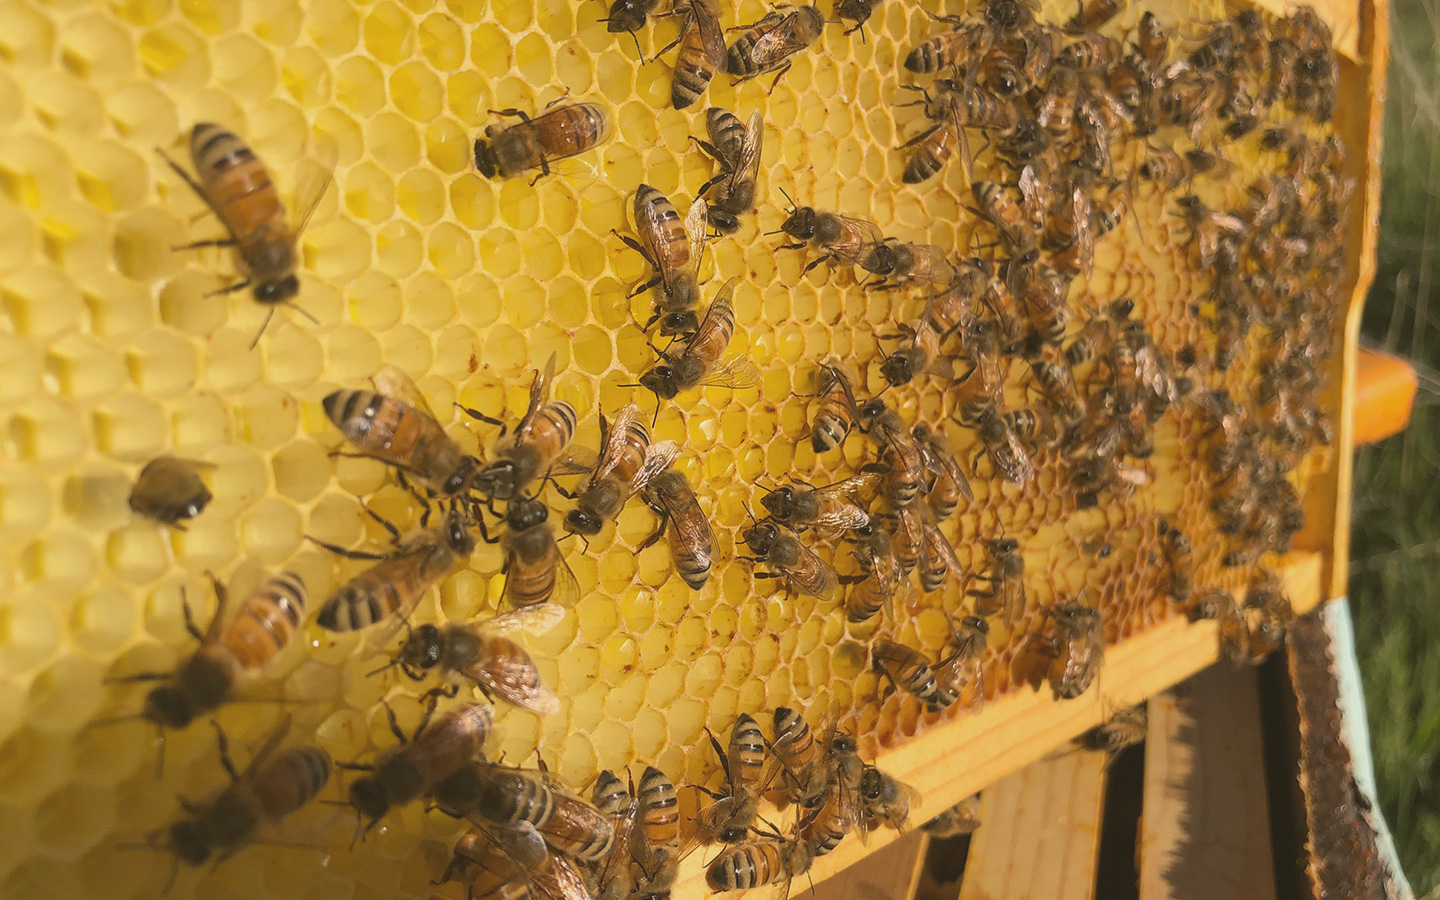 Bees tend a honeycomb in a frame from one of Becca Skinner's beehives.